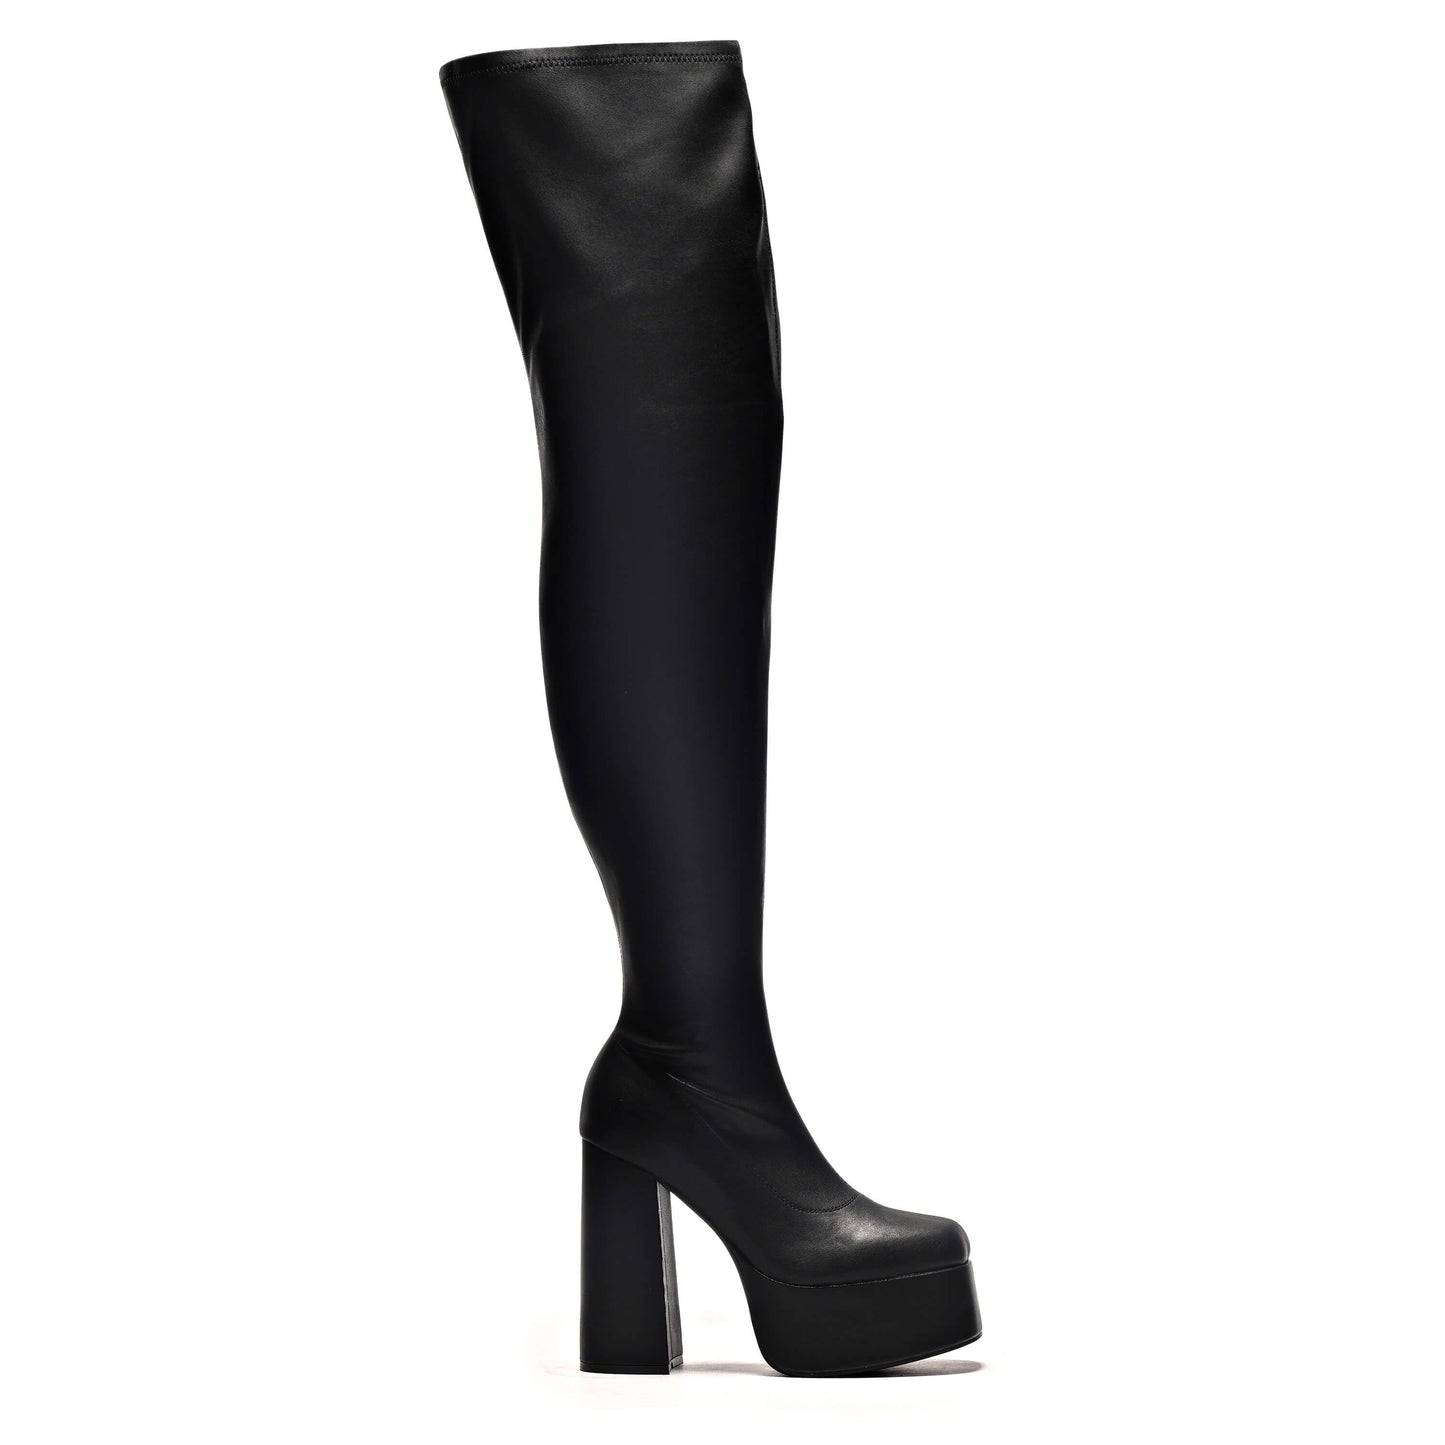 The Redemption Stretch Thigh High Boots - Long Boots - KOI Footwear - Black - Side View